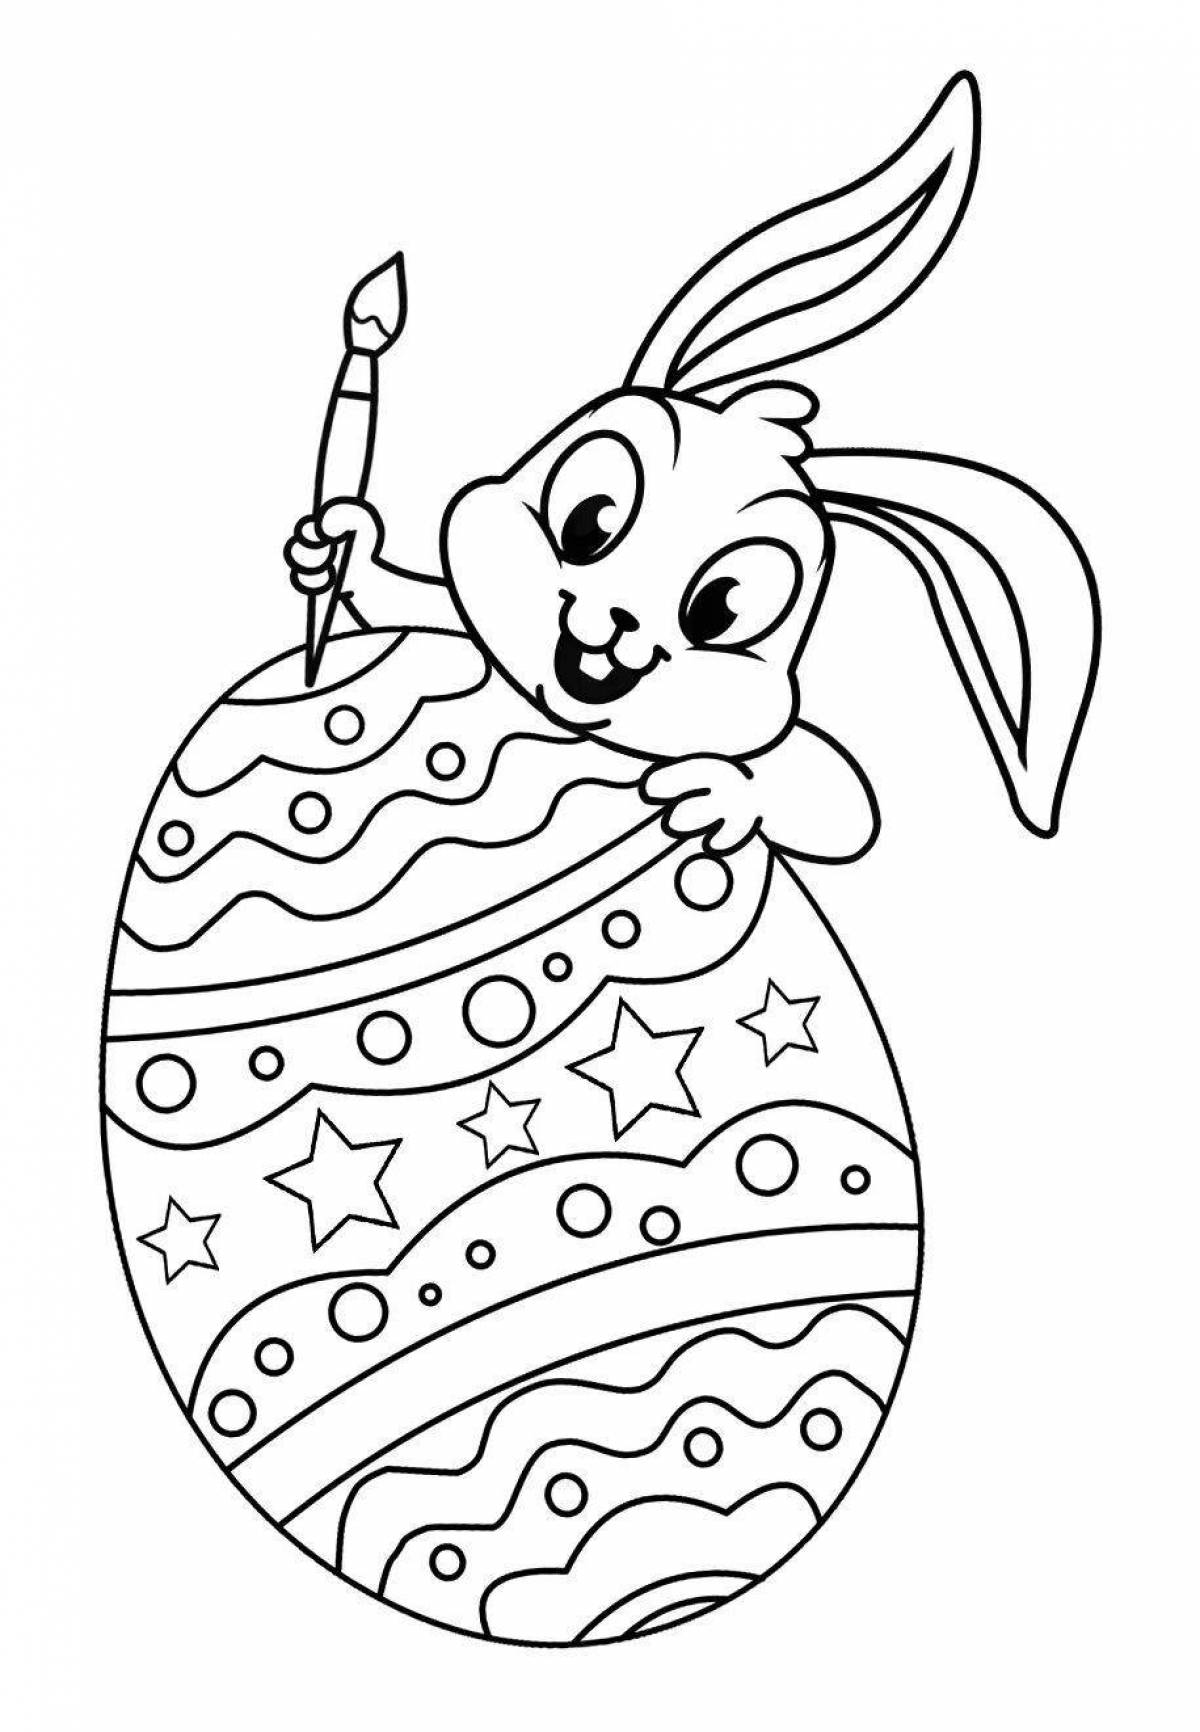 Cute easter bunny coloring book